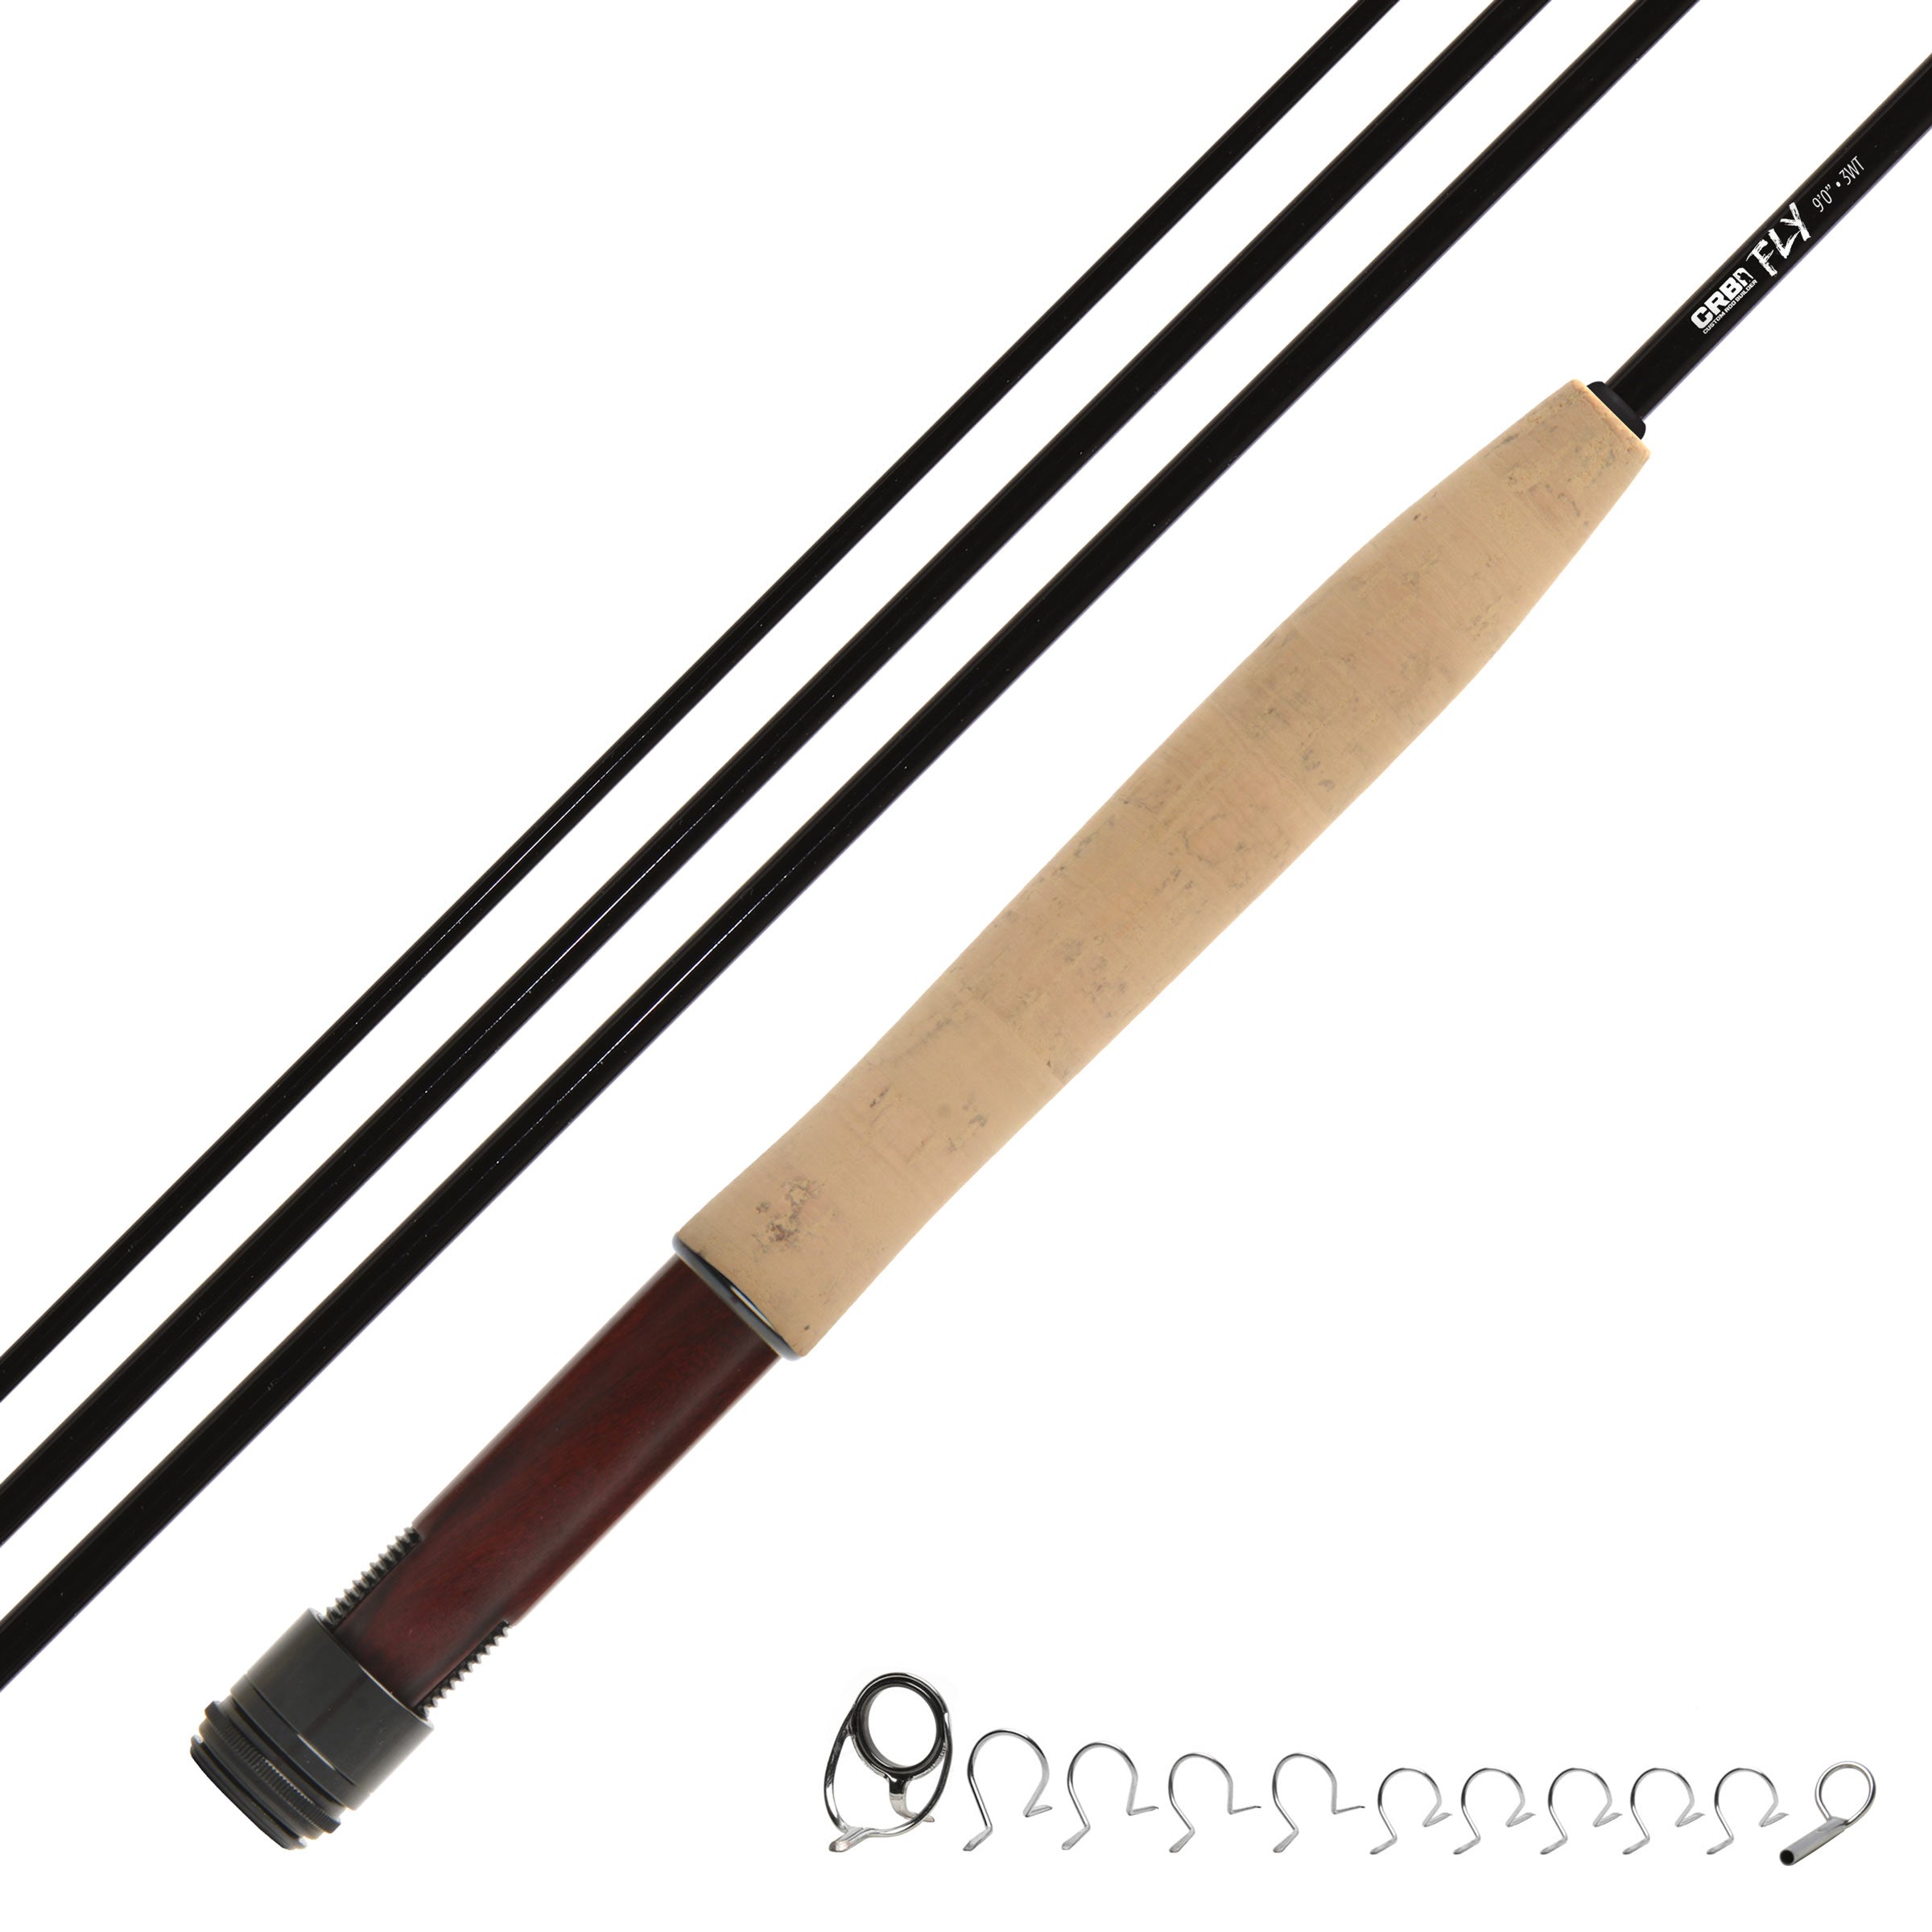 Miniature Fly Fishing Rod for Dollhouses [TEH 313]